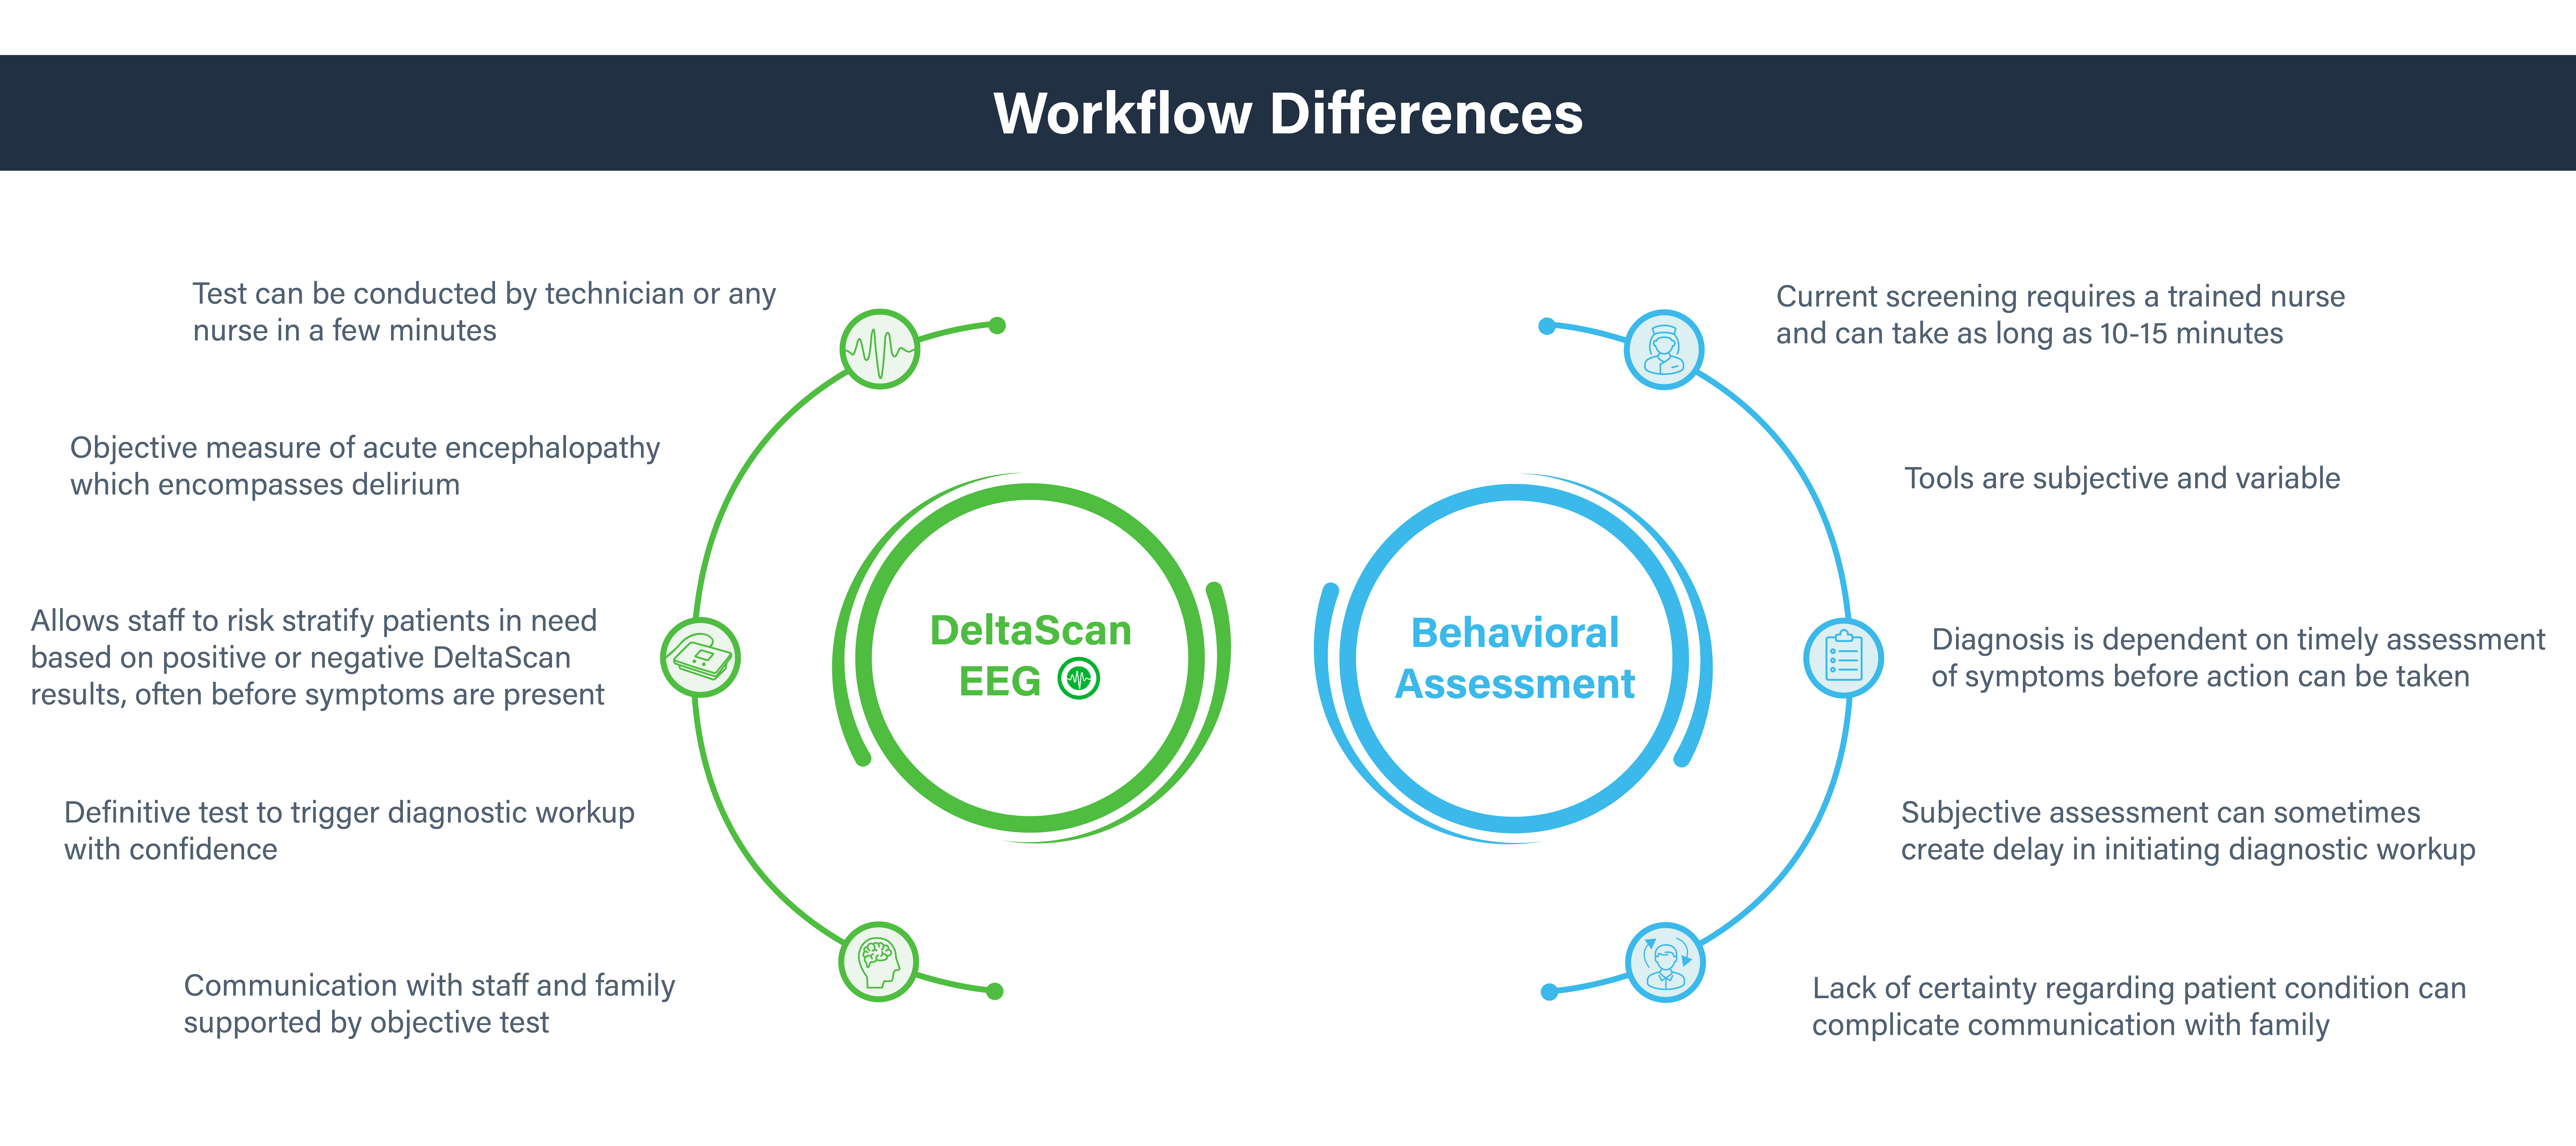 Workflow Differences acute encephalopathy v2